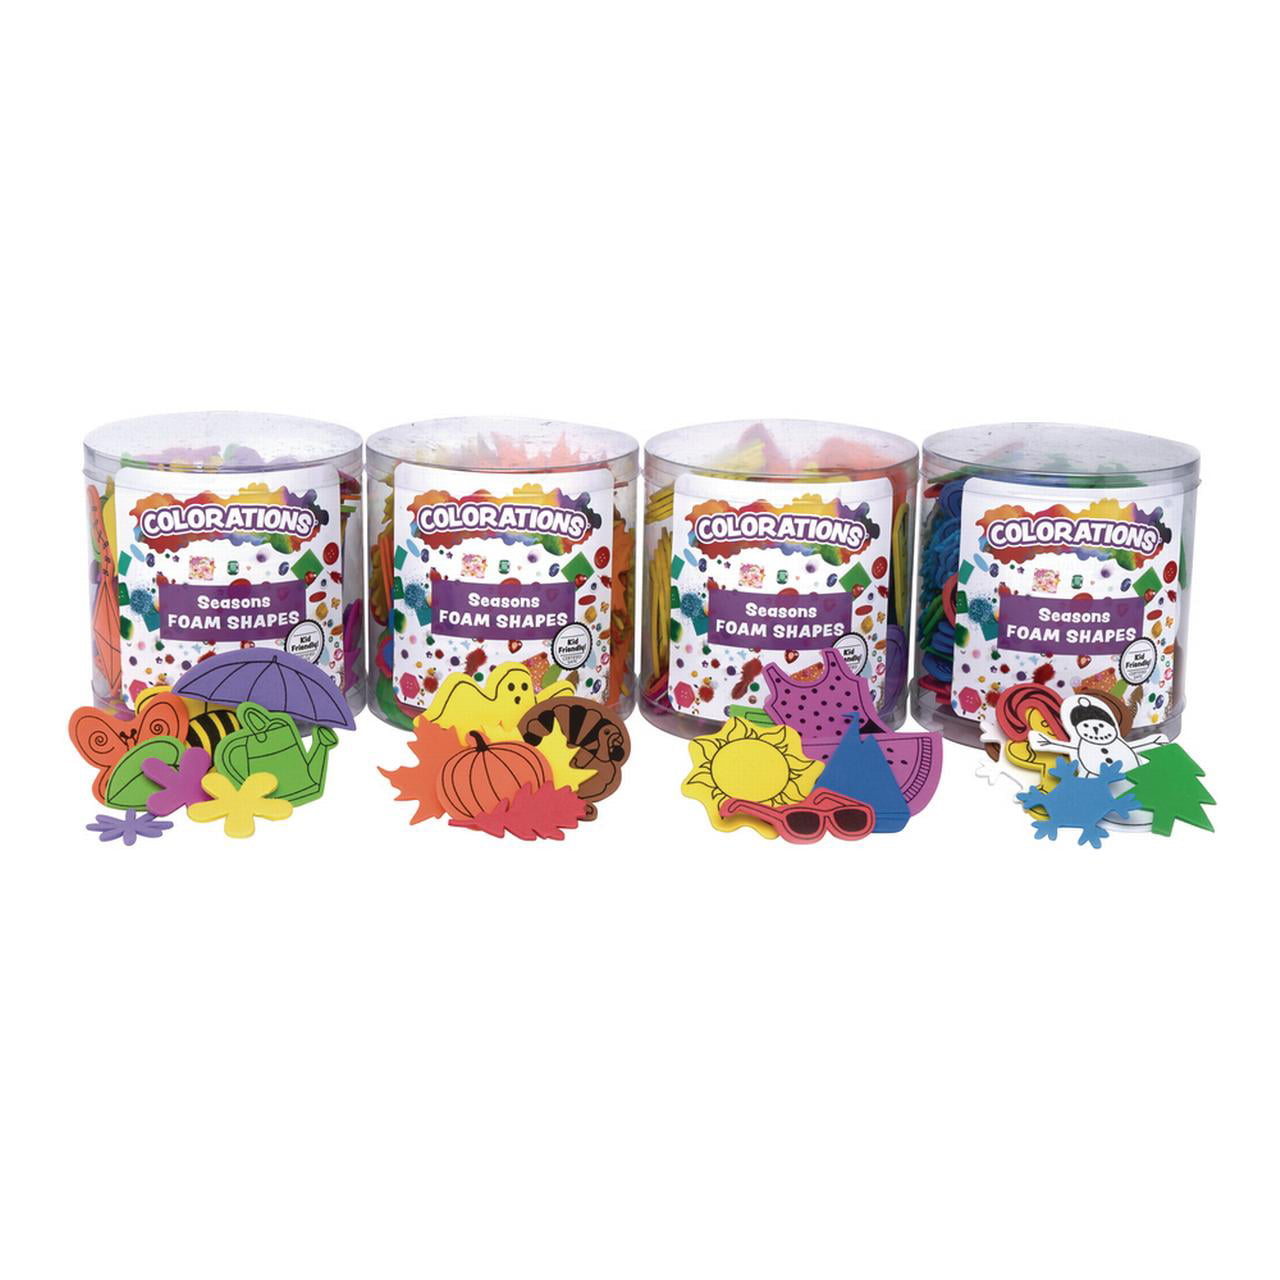 Colorations Seasons Foam Shapes Multipack Set of 4 Buckets Multicolor Foam for Kids Arts and Crafts Material 